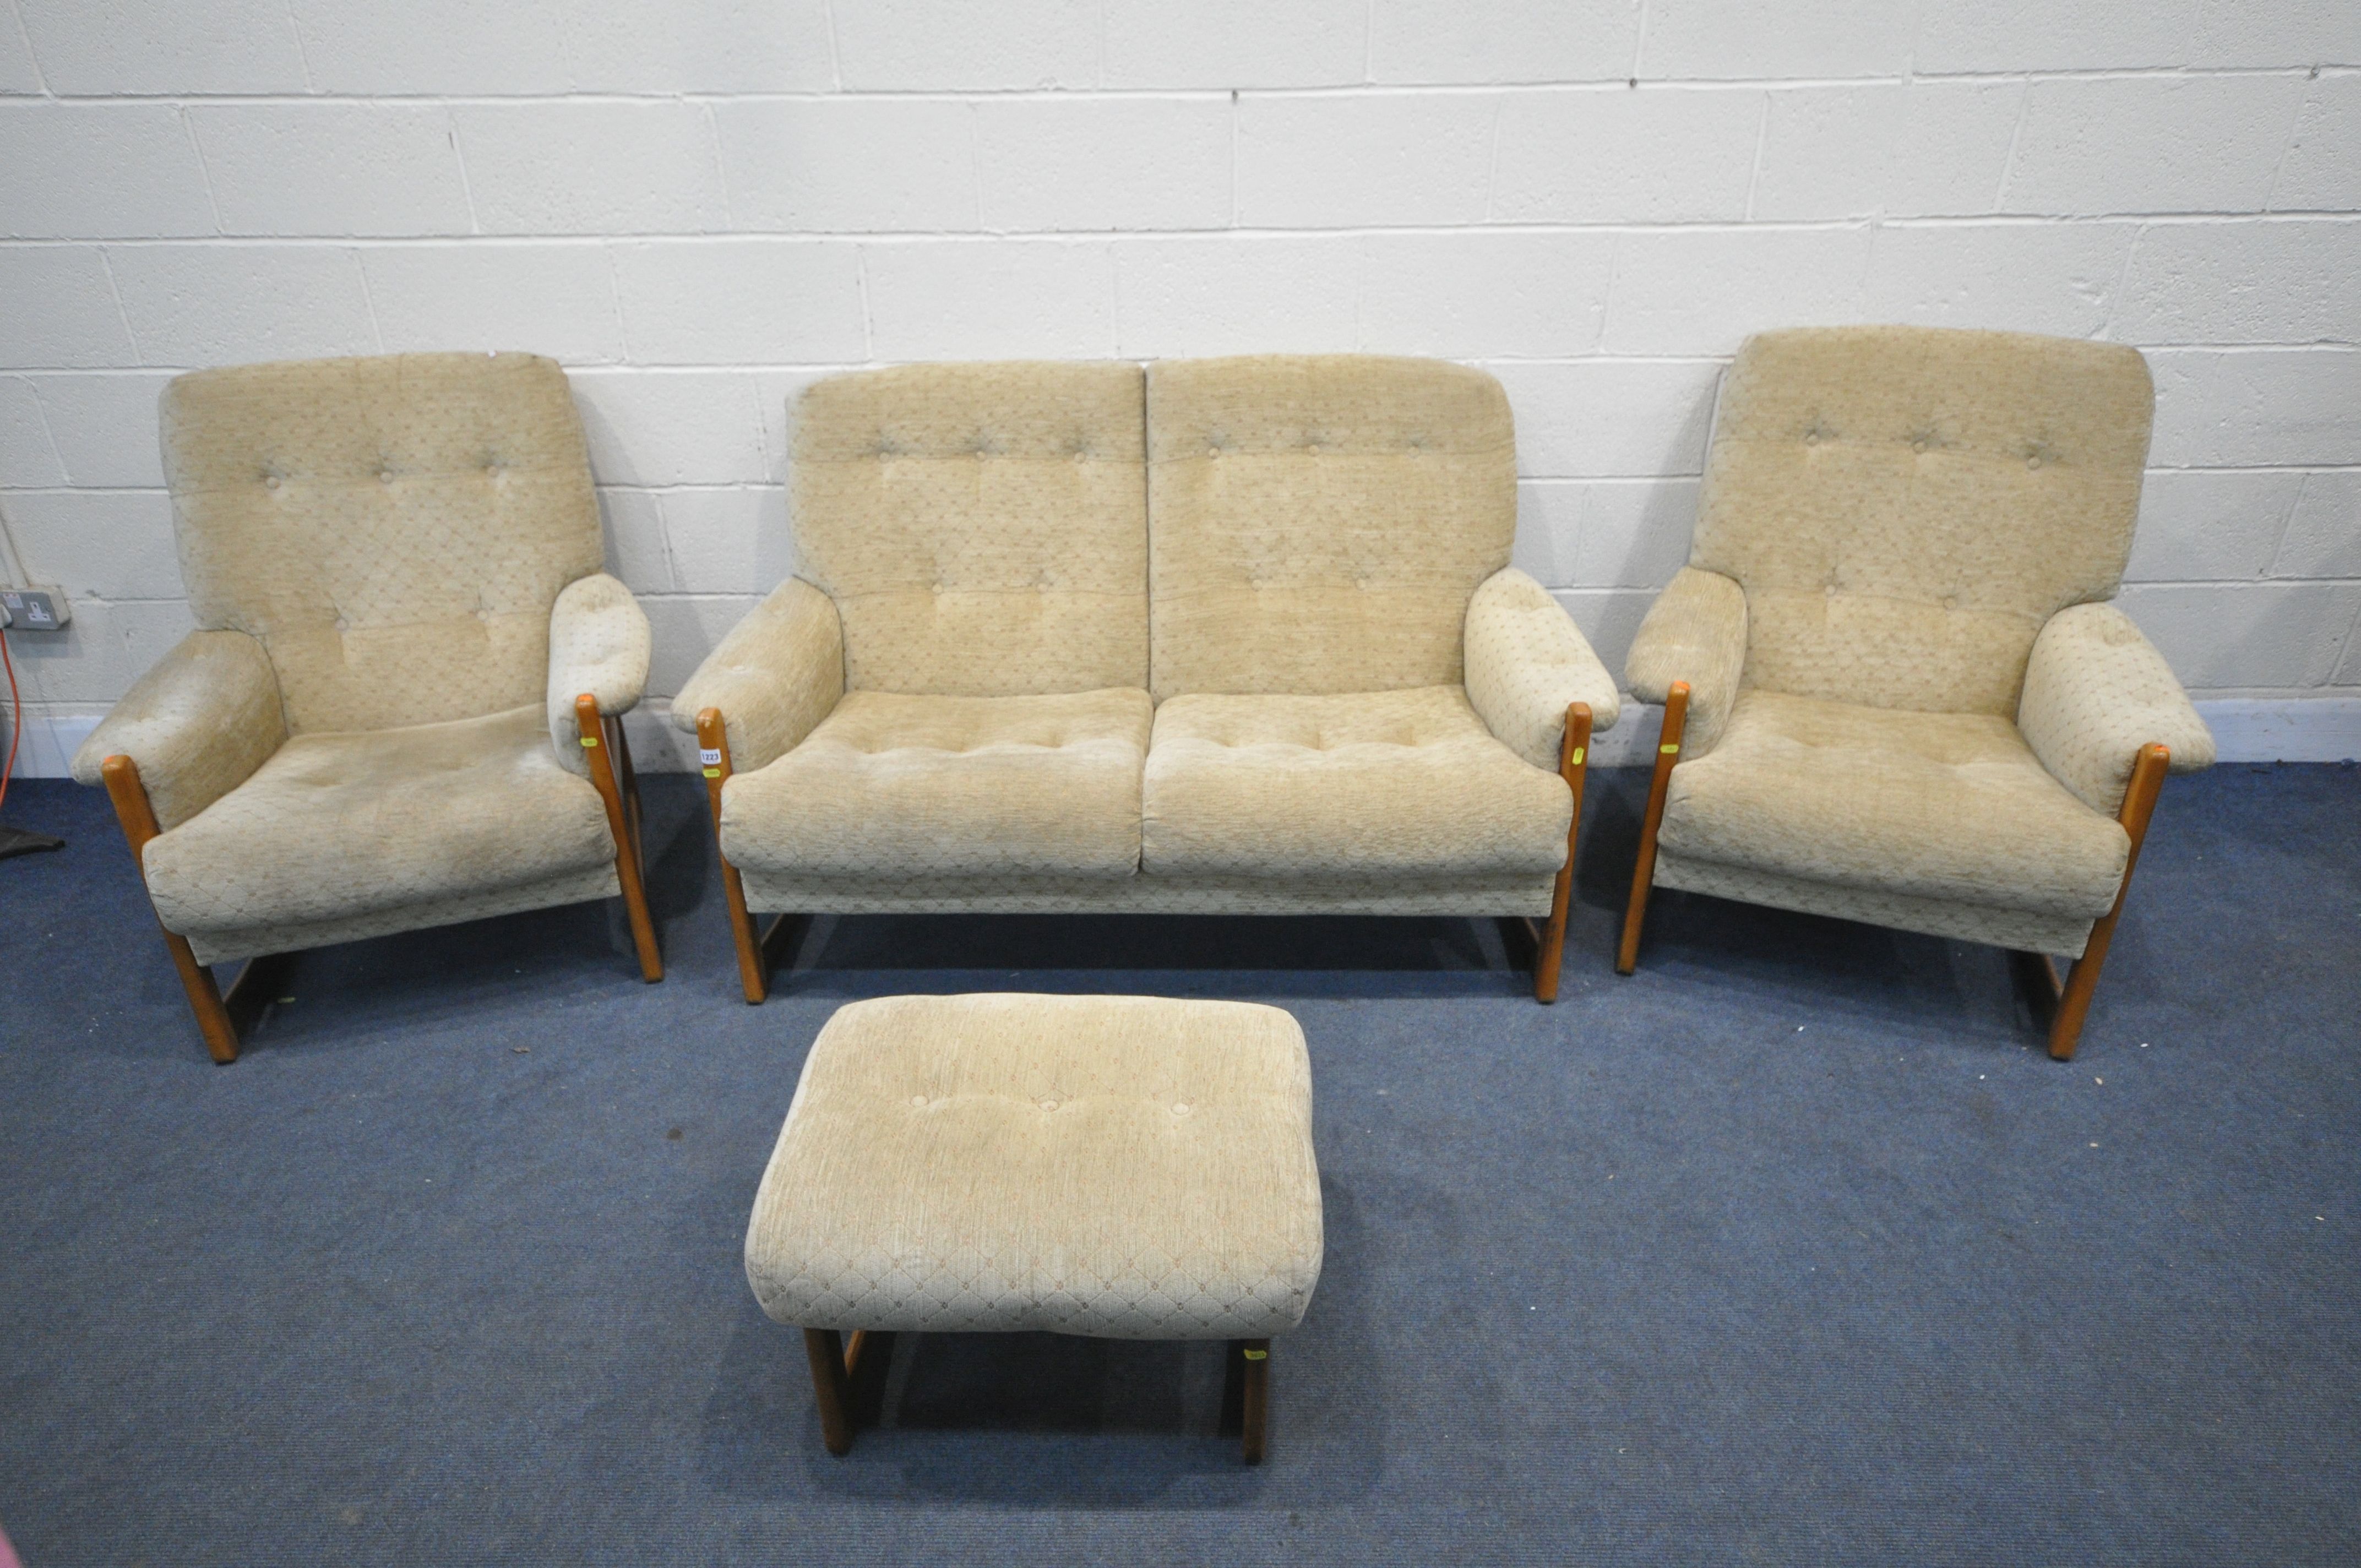 A MID CENTURY TEAK THREE PIECE LOUNGE SUITE, comprising a three seater settee, a pair of armchairs